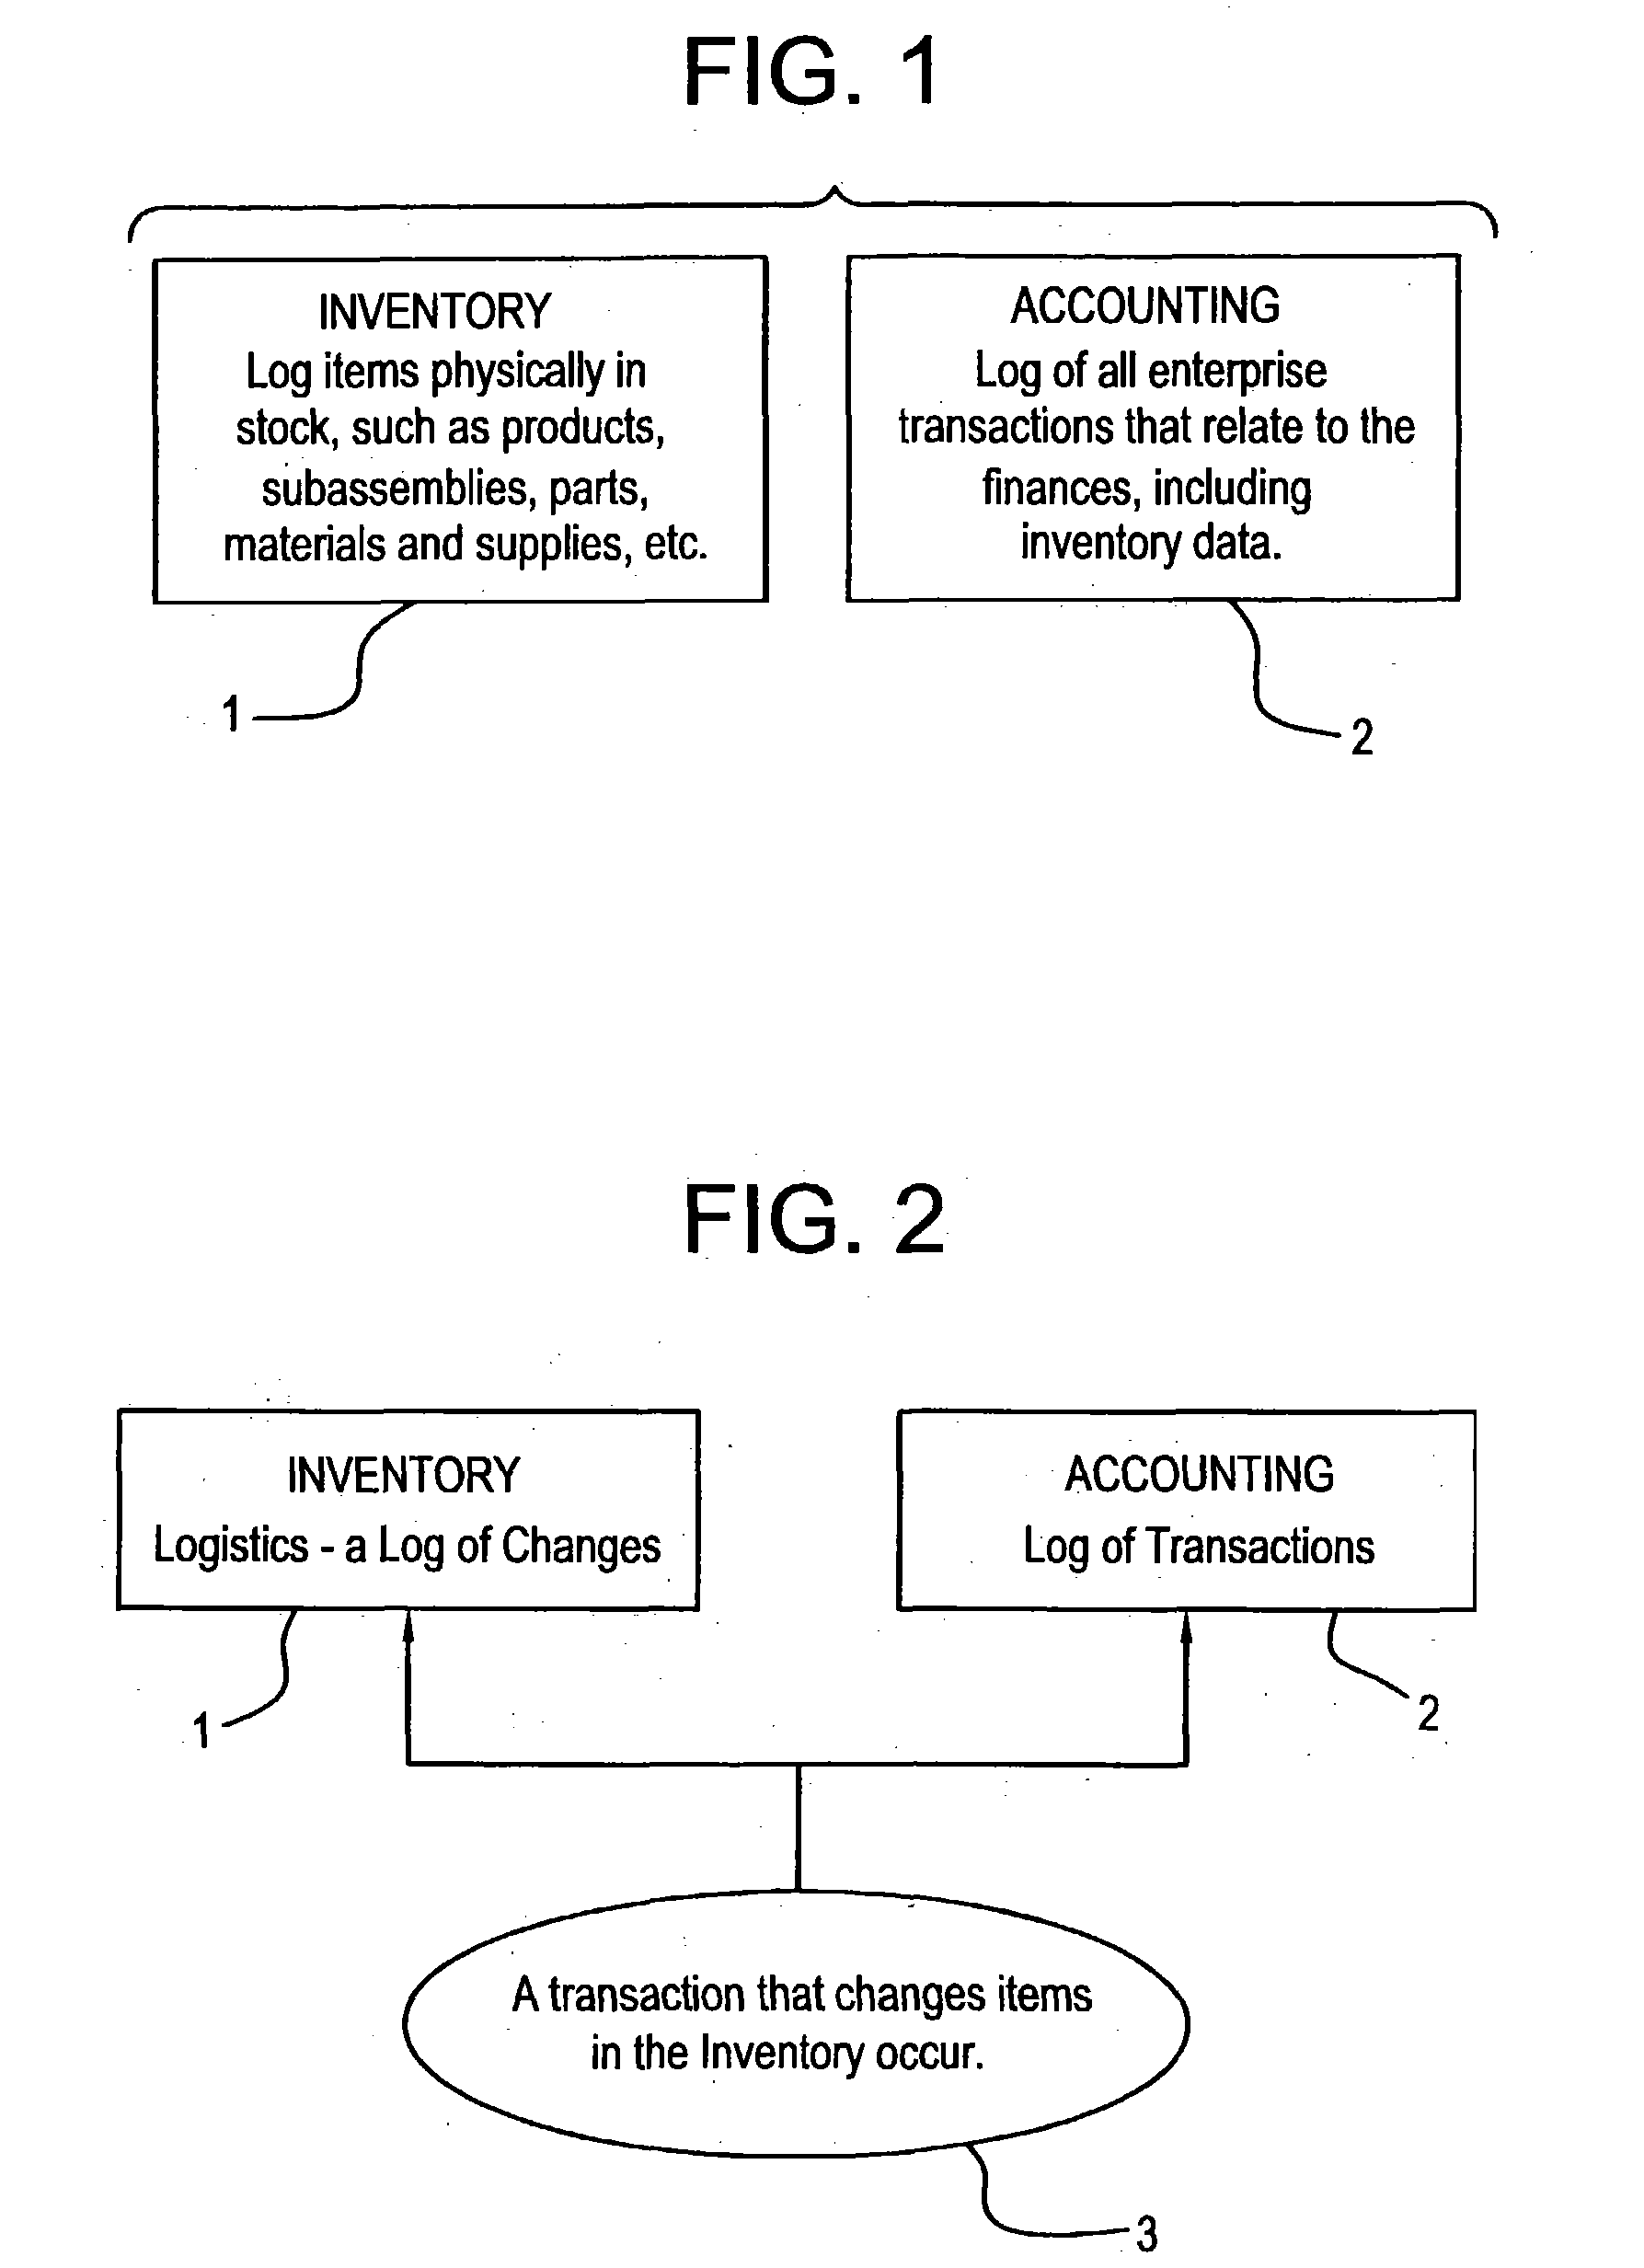 Information system comprised of synchronized software application moduless with individual databases for implementing and changing business requirements to be automated